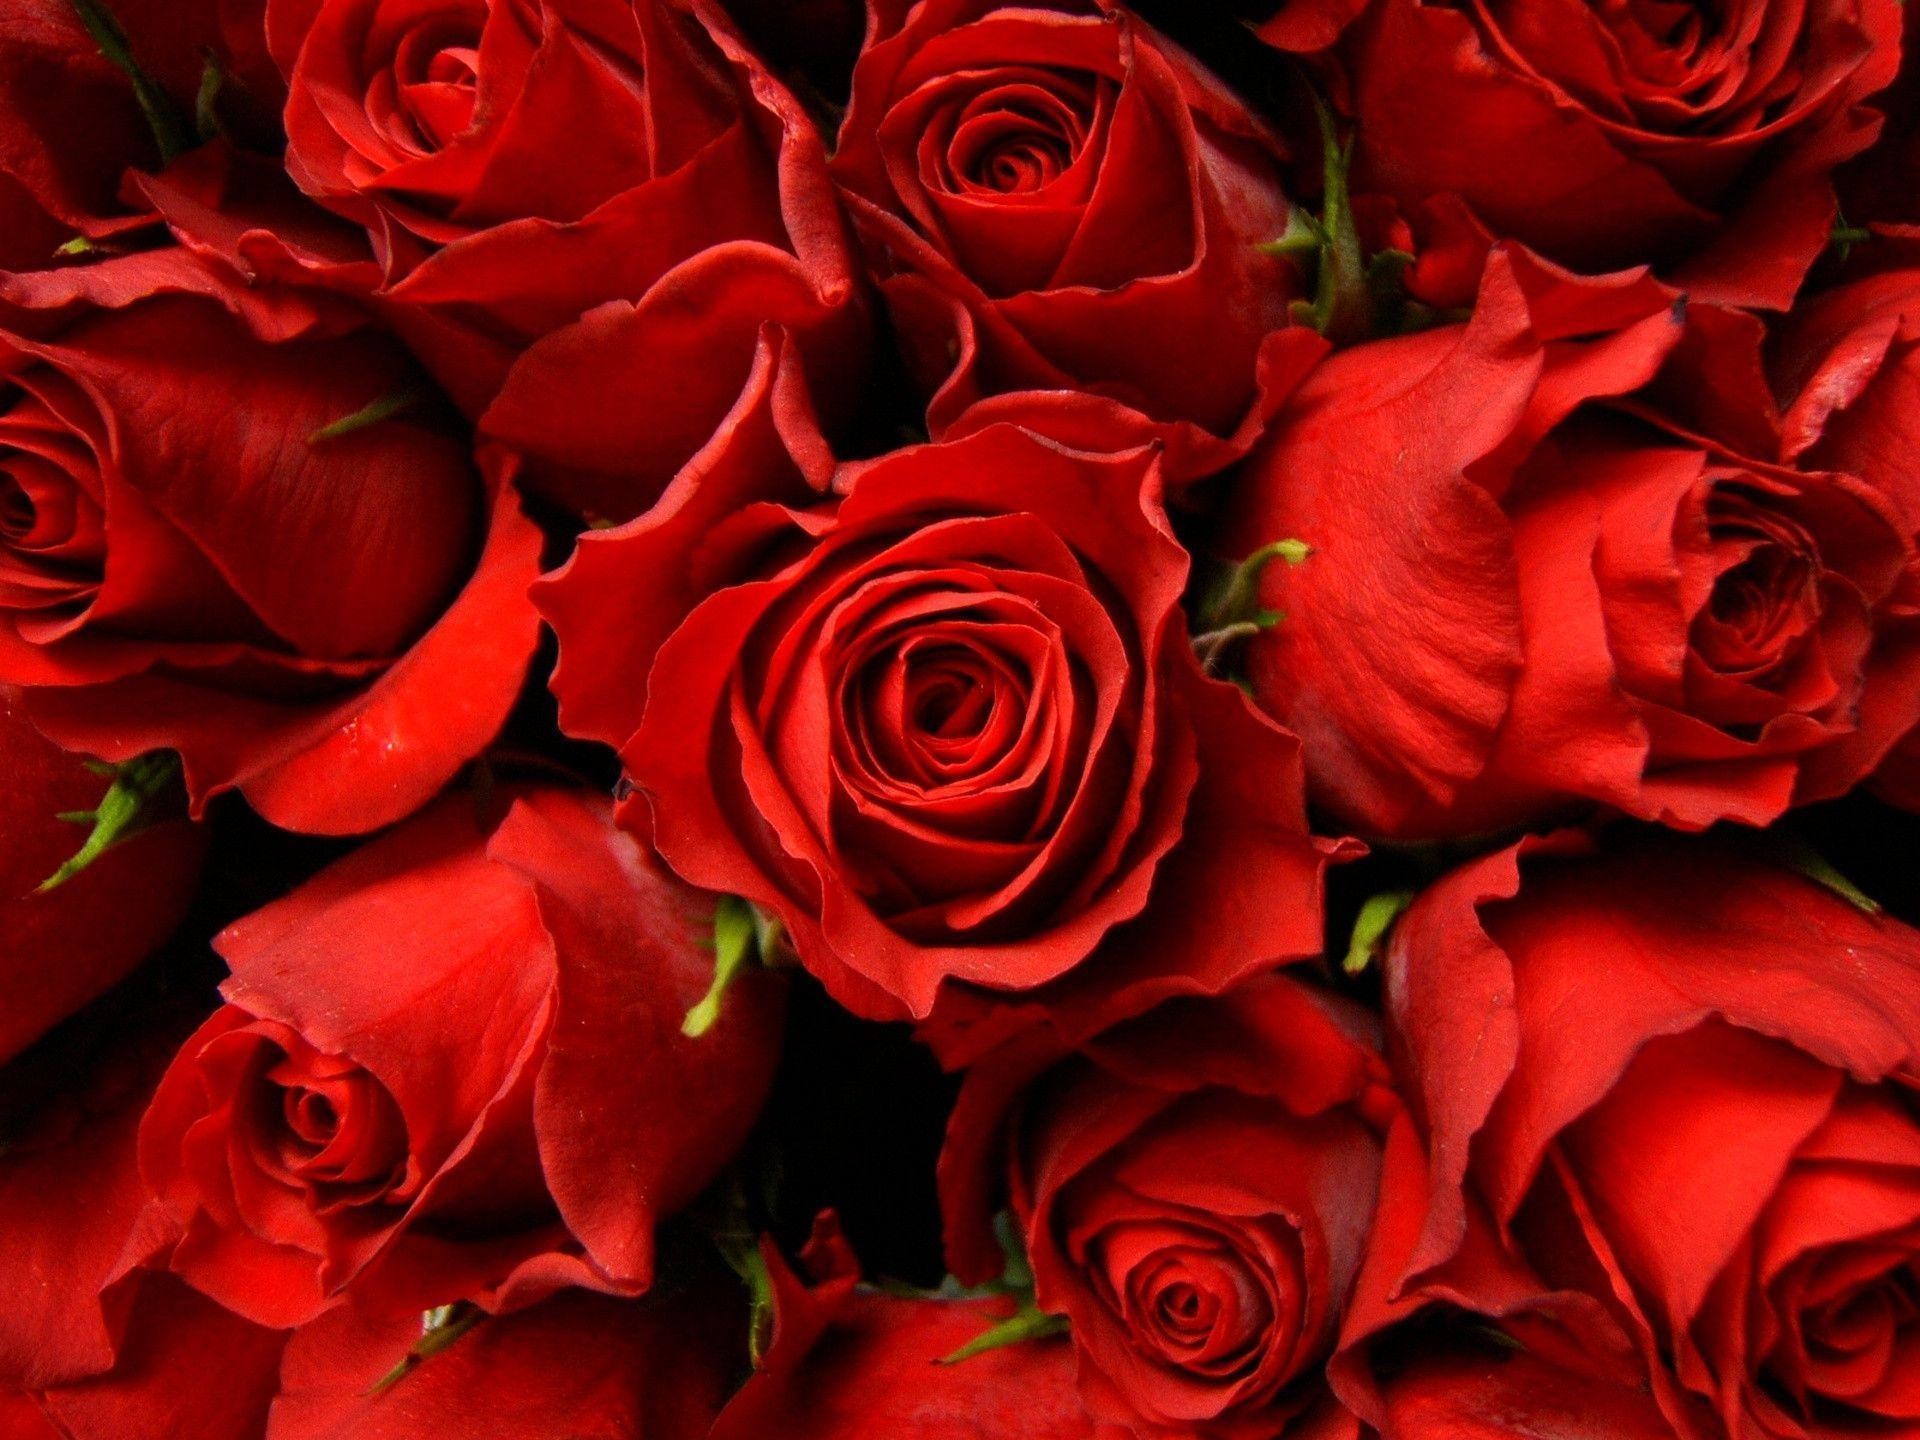 1920x1440 Red Roses Desktop Background - Boomwallpaper.com | HD Images | HD .